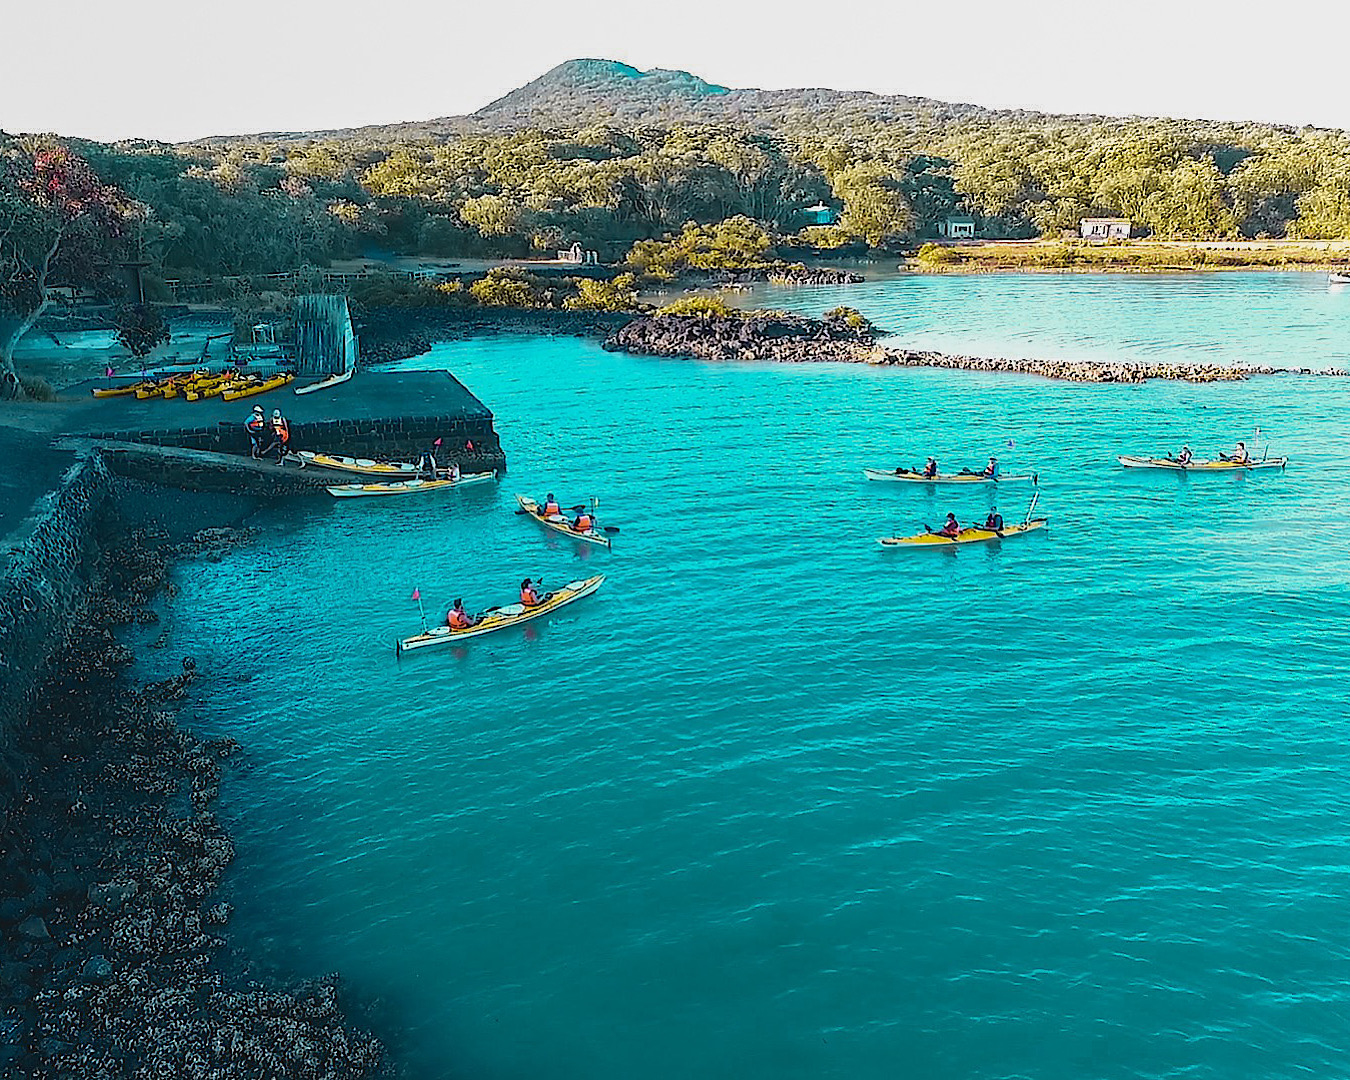 Another great thing to do in auckland - a group of kayakers paddle around in the water off Rangitoto Island. 